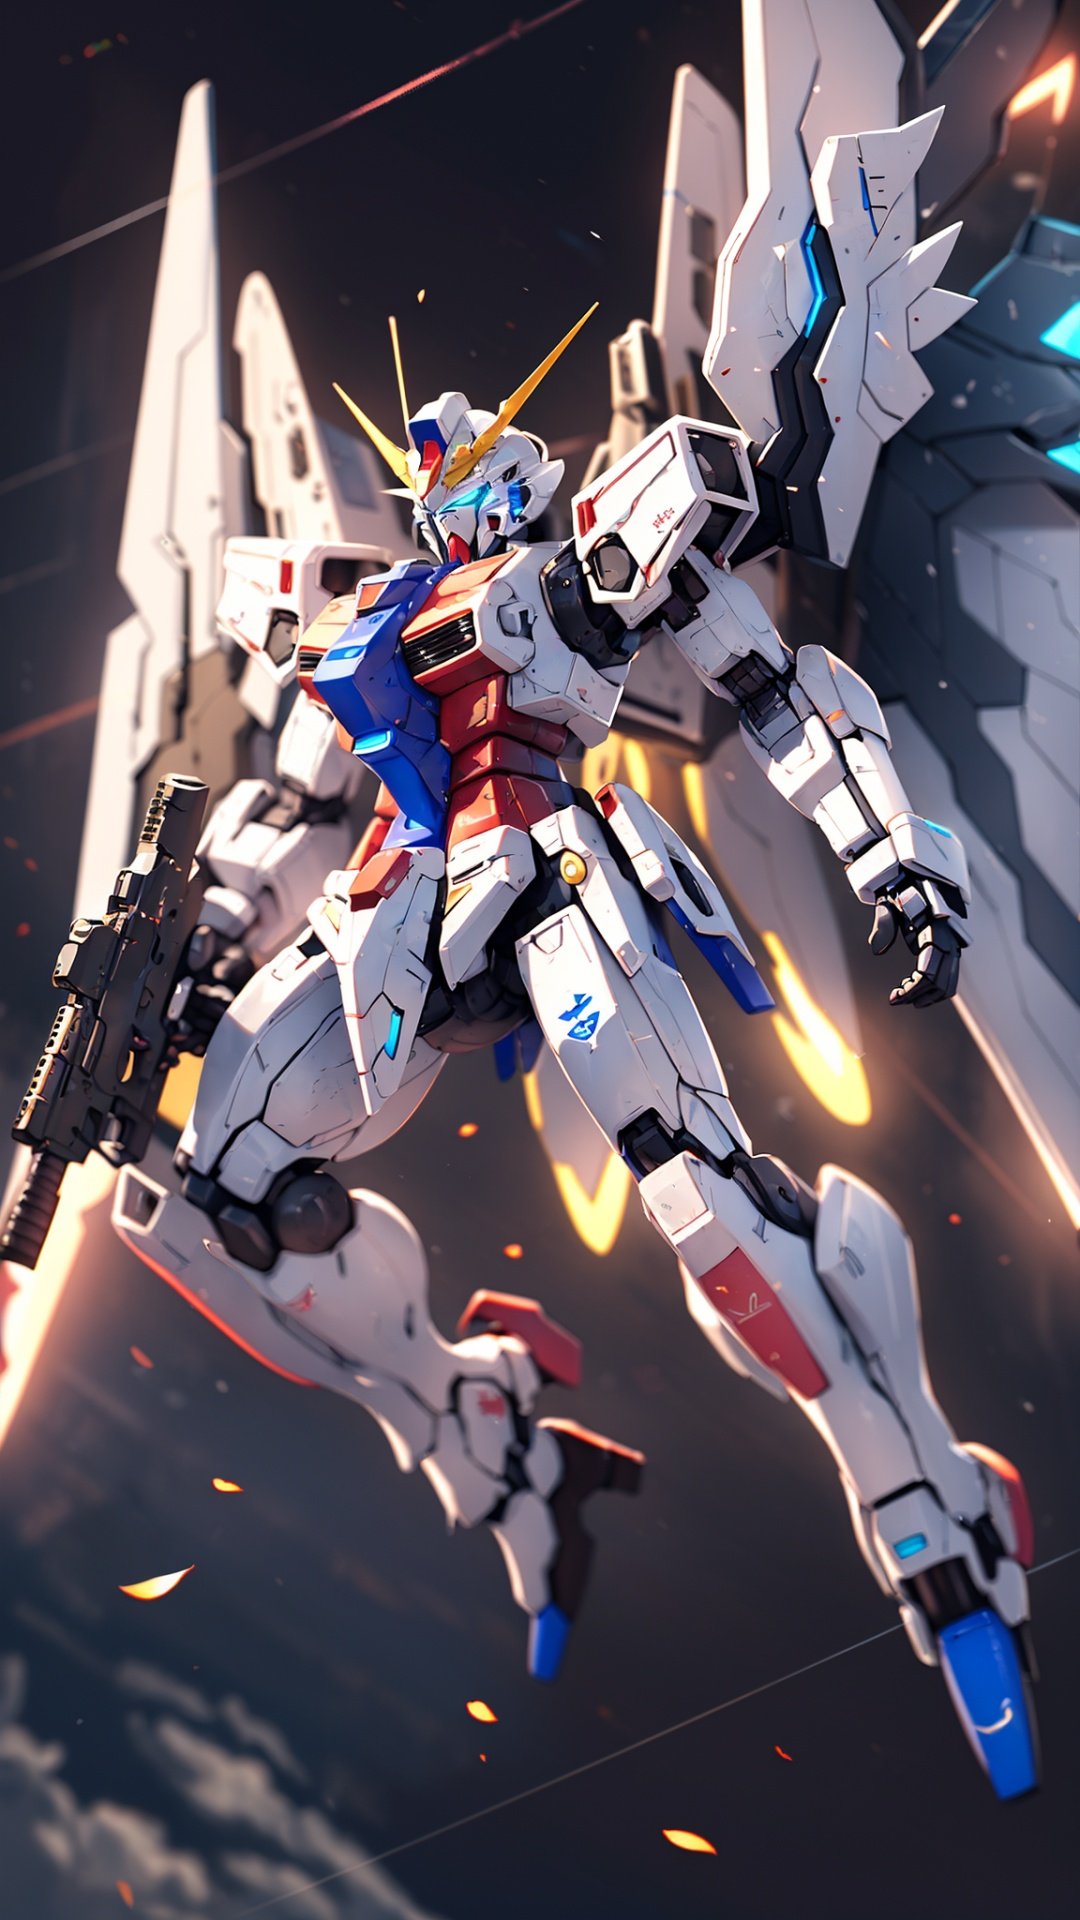 Hyperrealistic art BJ_Gundam,wings,solo,blue_eyes,holding,weapon,holding_weapon,gun,no_humans,glowing,robot,holding_gun,mecha,glowing_eyes,floating,flying,science_fiction,space,v-fin,energy_gun,mobile_suit,beam_rifle,cinematic lighting,strong contrast,high level of detail,Best quality,masterpiece,White background,. Extremely high-resolution details,photographic,realism pushed to extreme,fine texture,incredibly lifelike,<lora:Gundam_Mecha_v5.2:0.6>, . Extremely high-resolution details, photographic, realism pushed to extreme, fine texture, incredibly lifelike